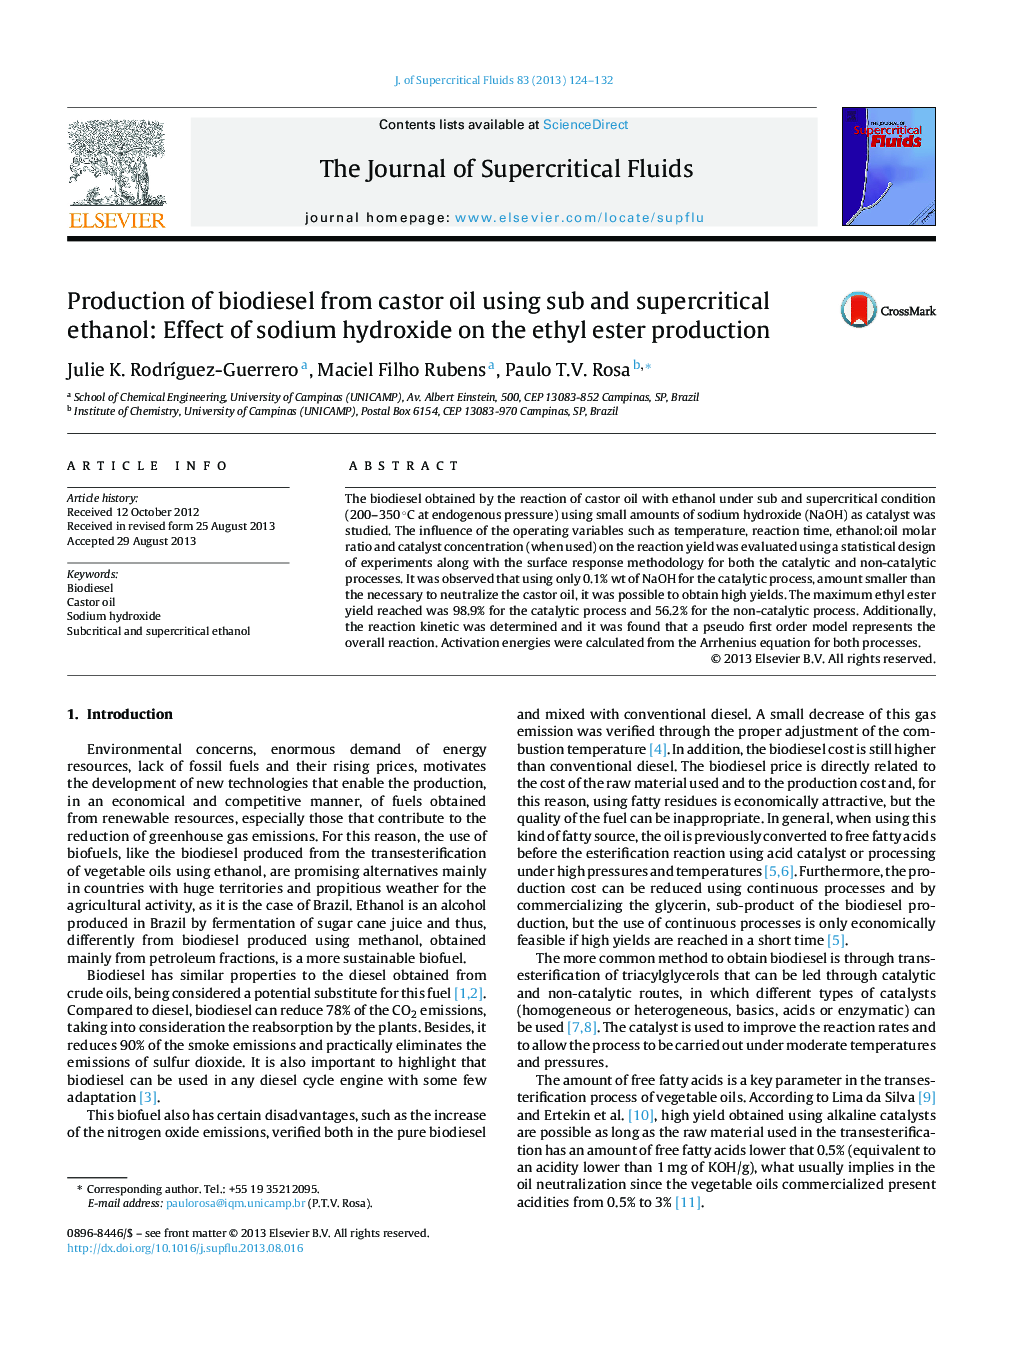 Production of biodiesel from castor oil using sub and supercritical ethanol: Effect of sodium hydroxide on the ethyl ester production